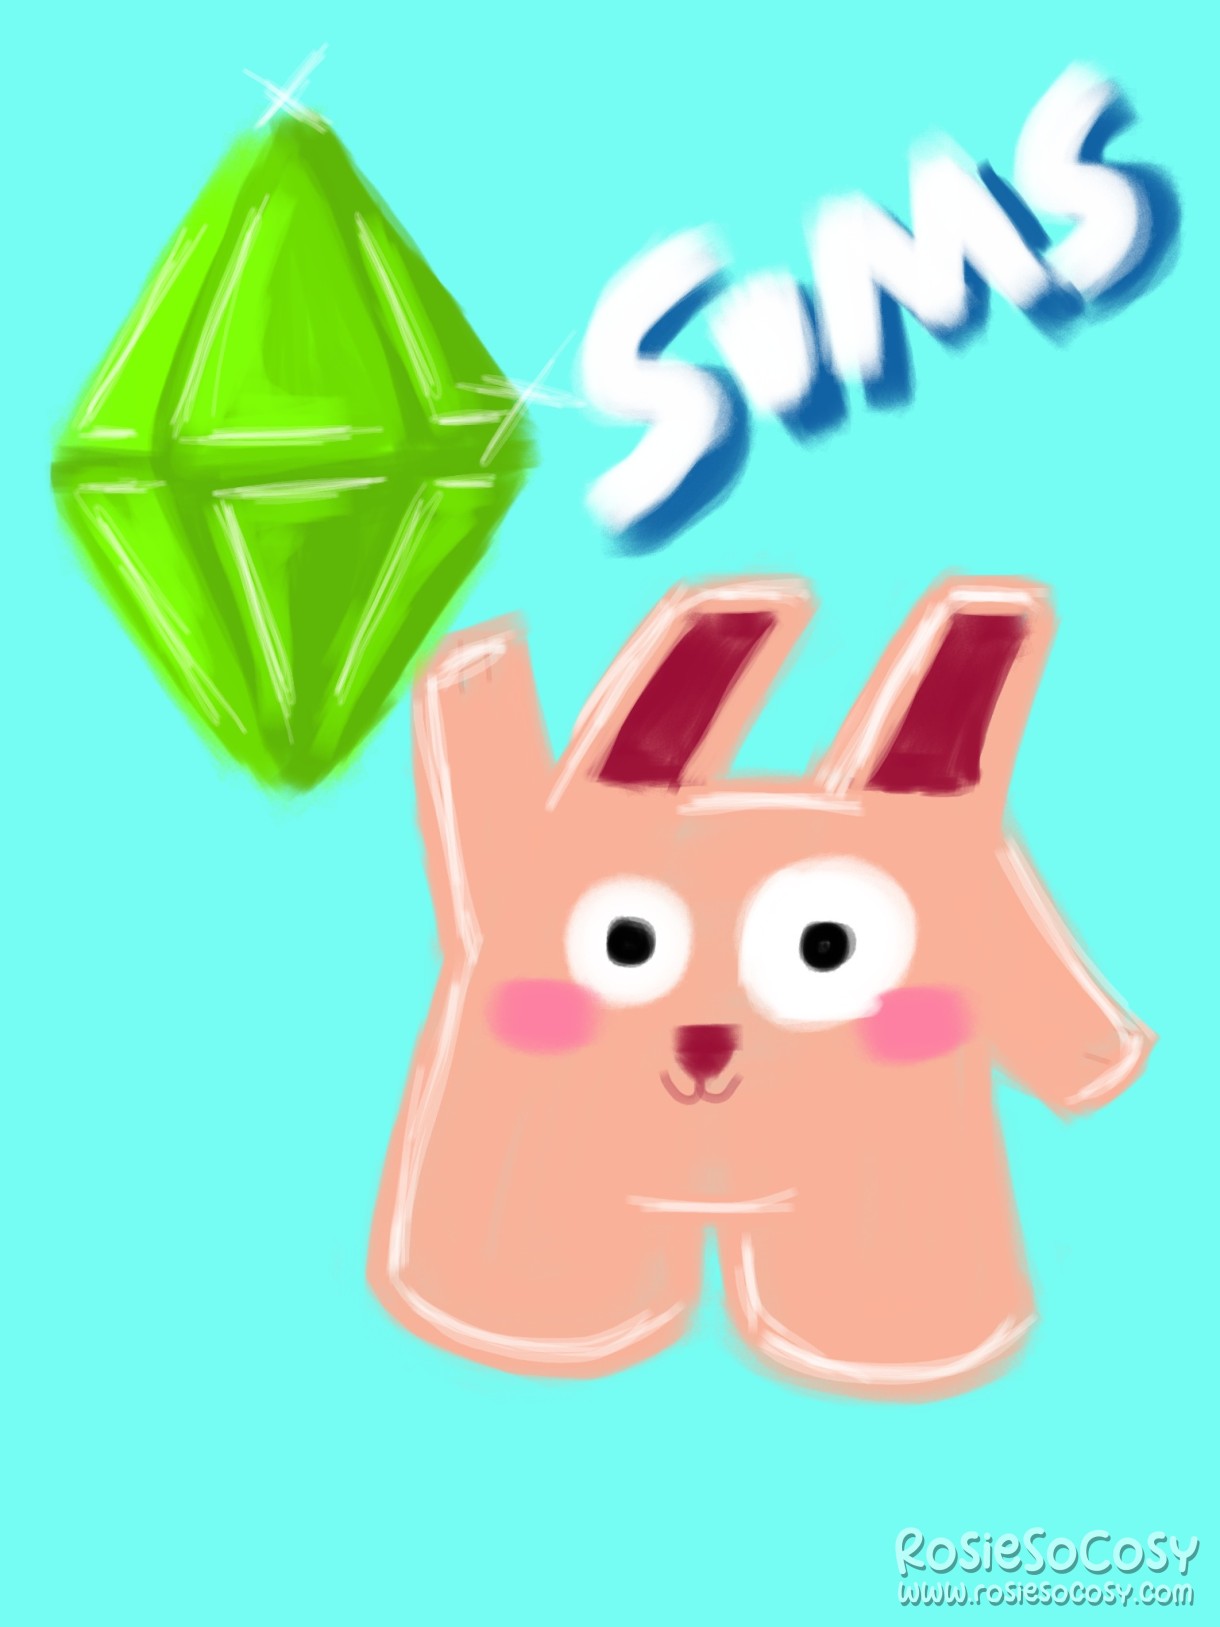 A bright green plumbob next to a pink Freezer Bunny, with the text Sims above it. The background is plain aqua.